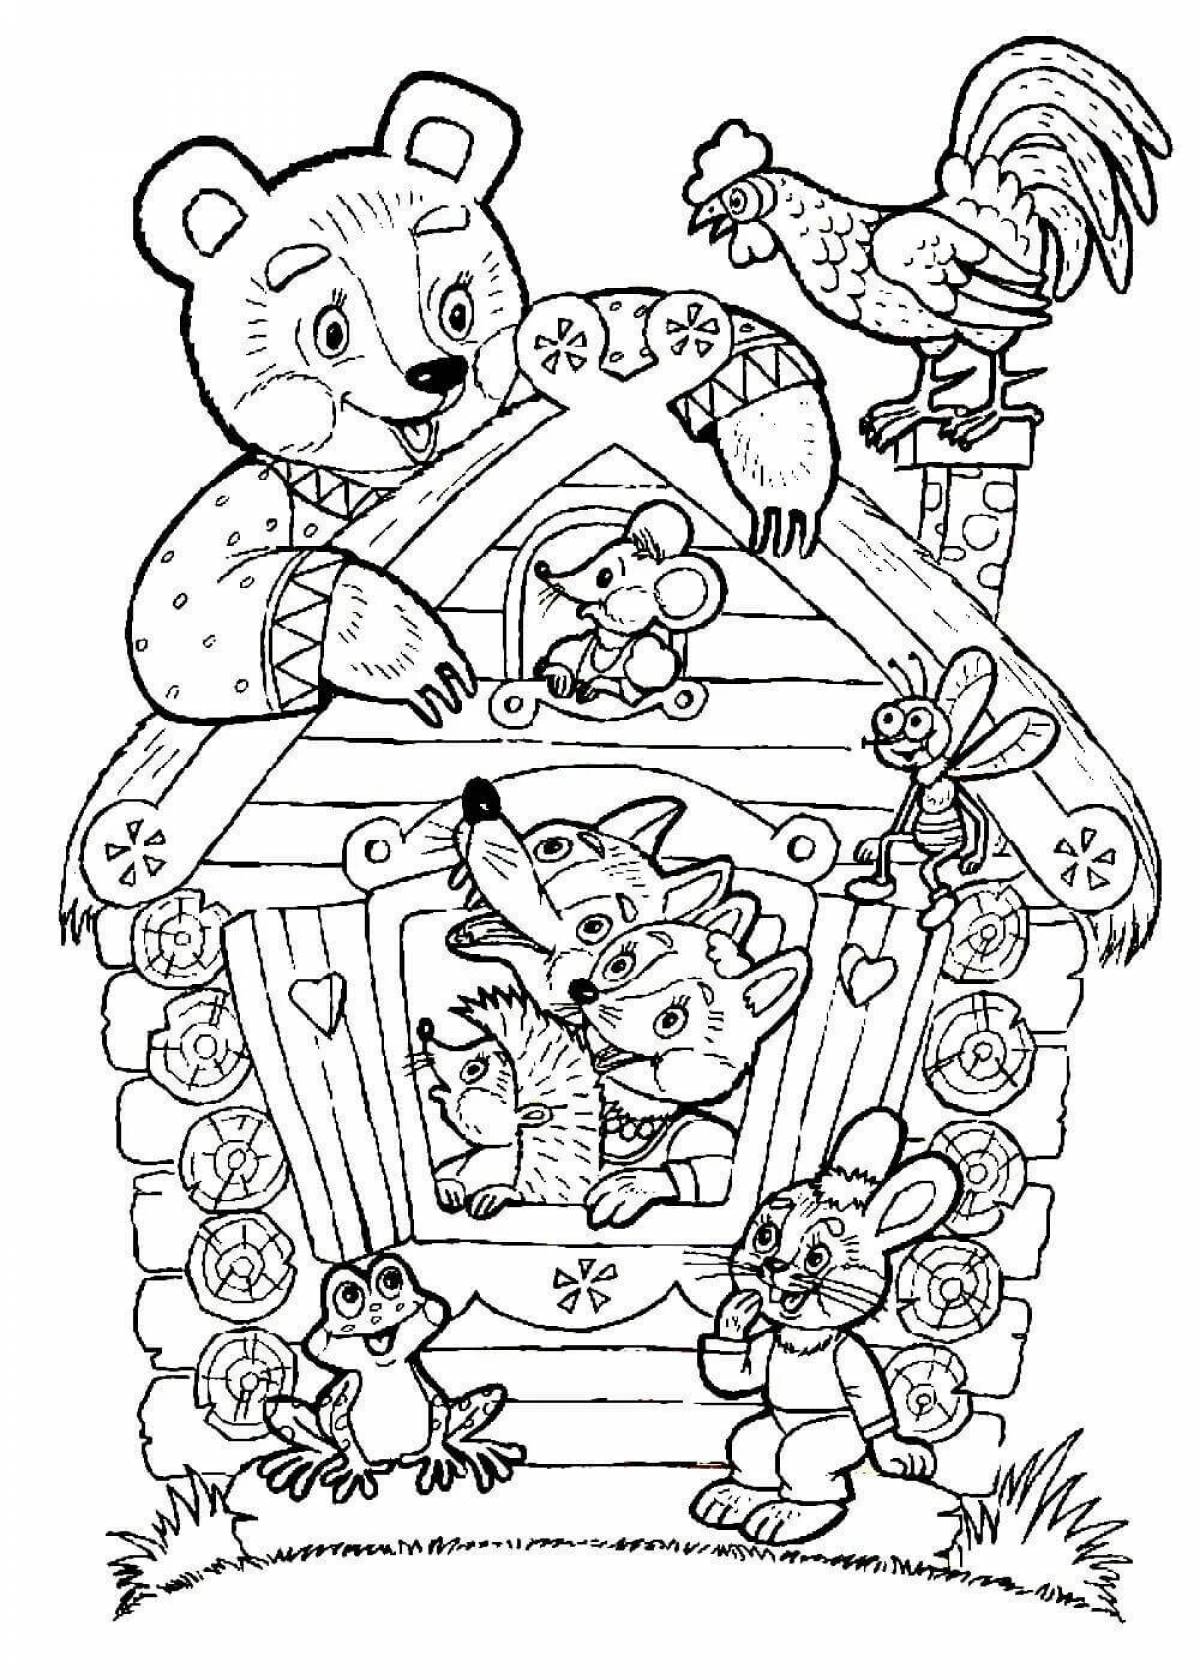 Overlay coloring for fairy tales for children Russian folk